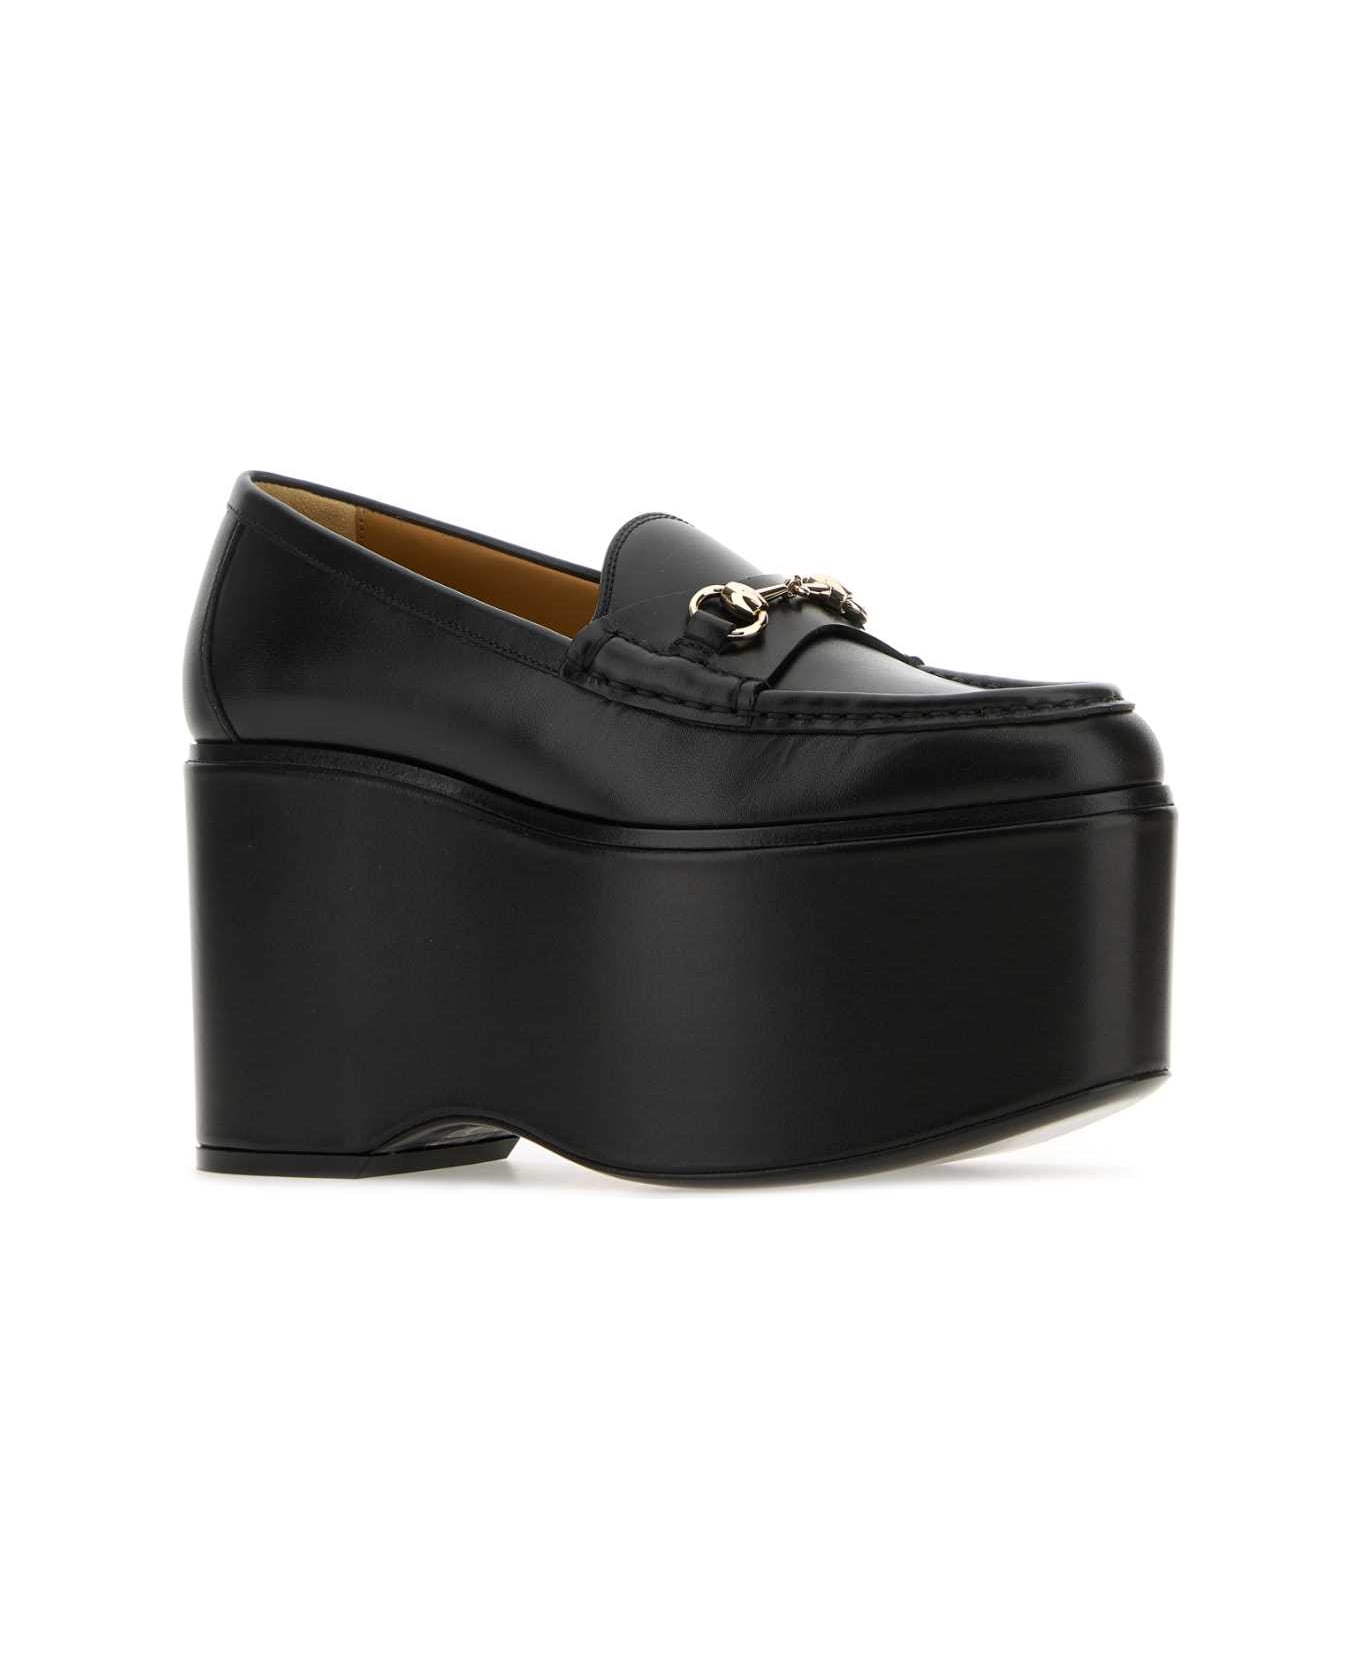 Gucci Black Leather Loafers - Black ウェッジシューズ